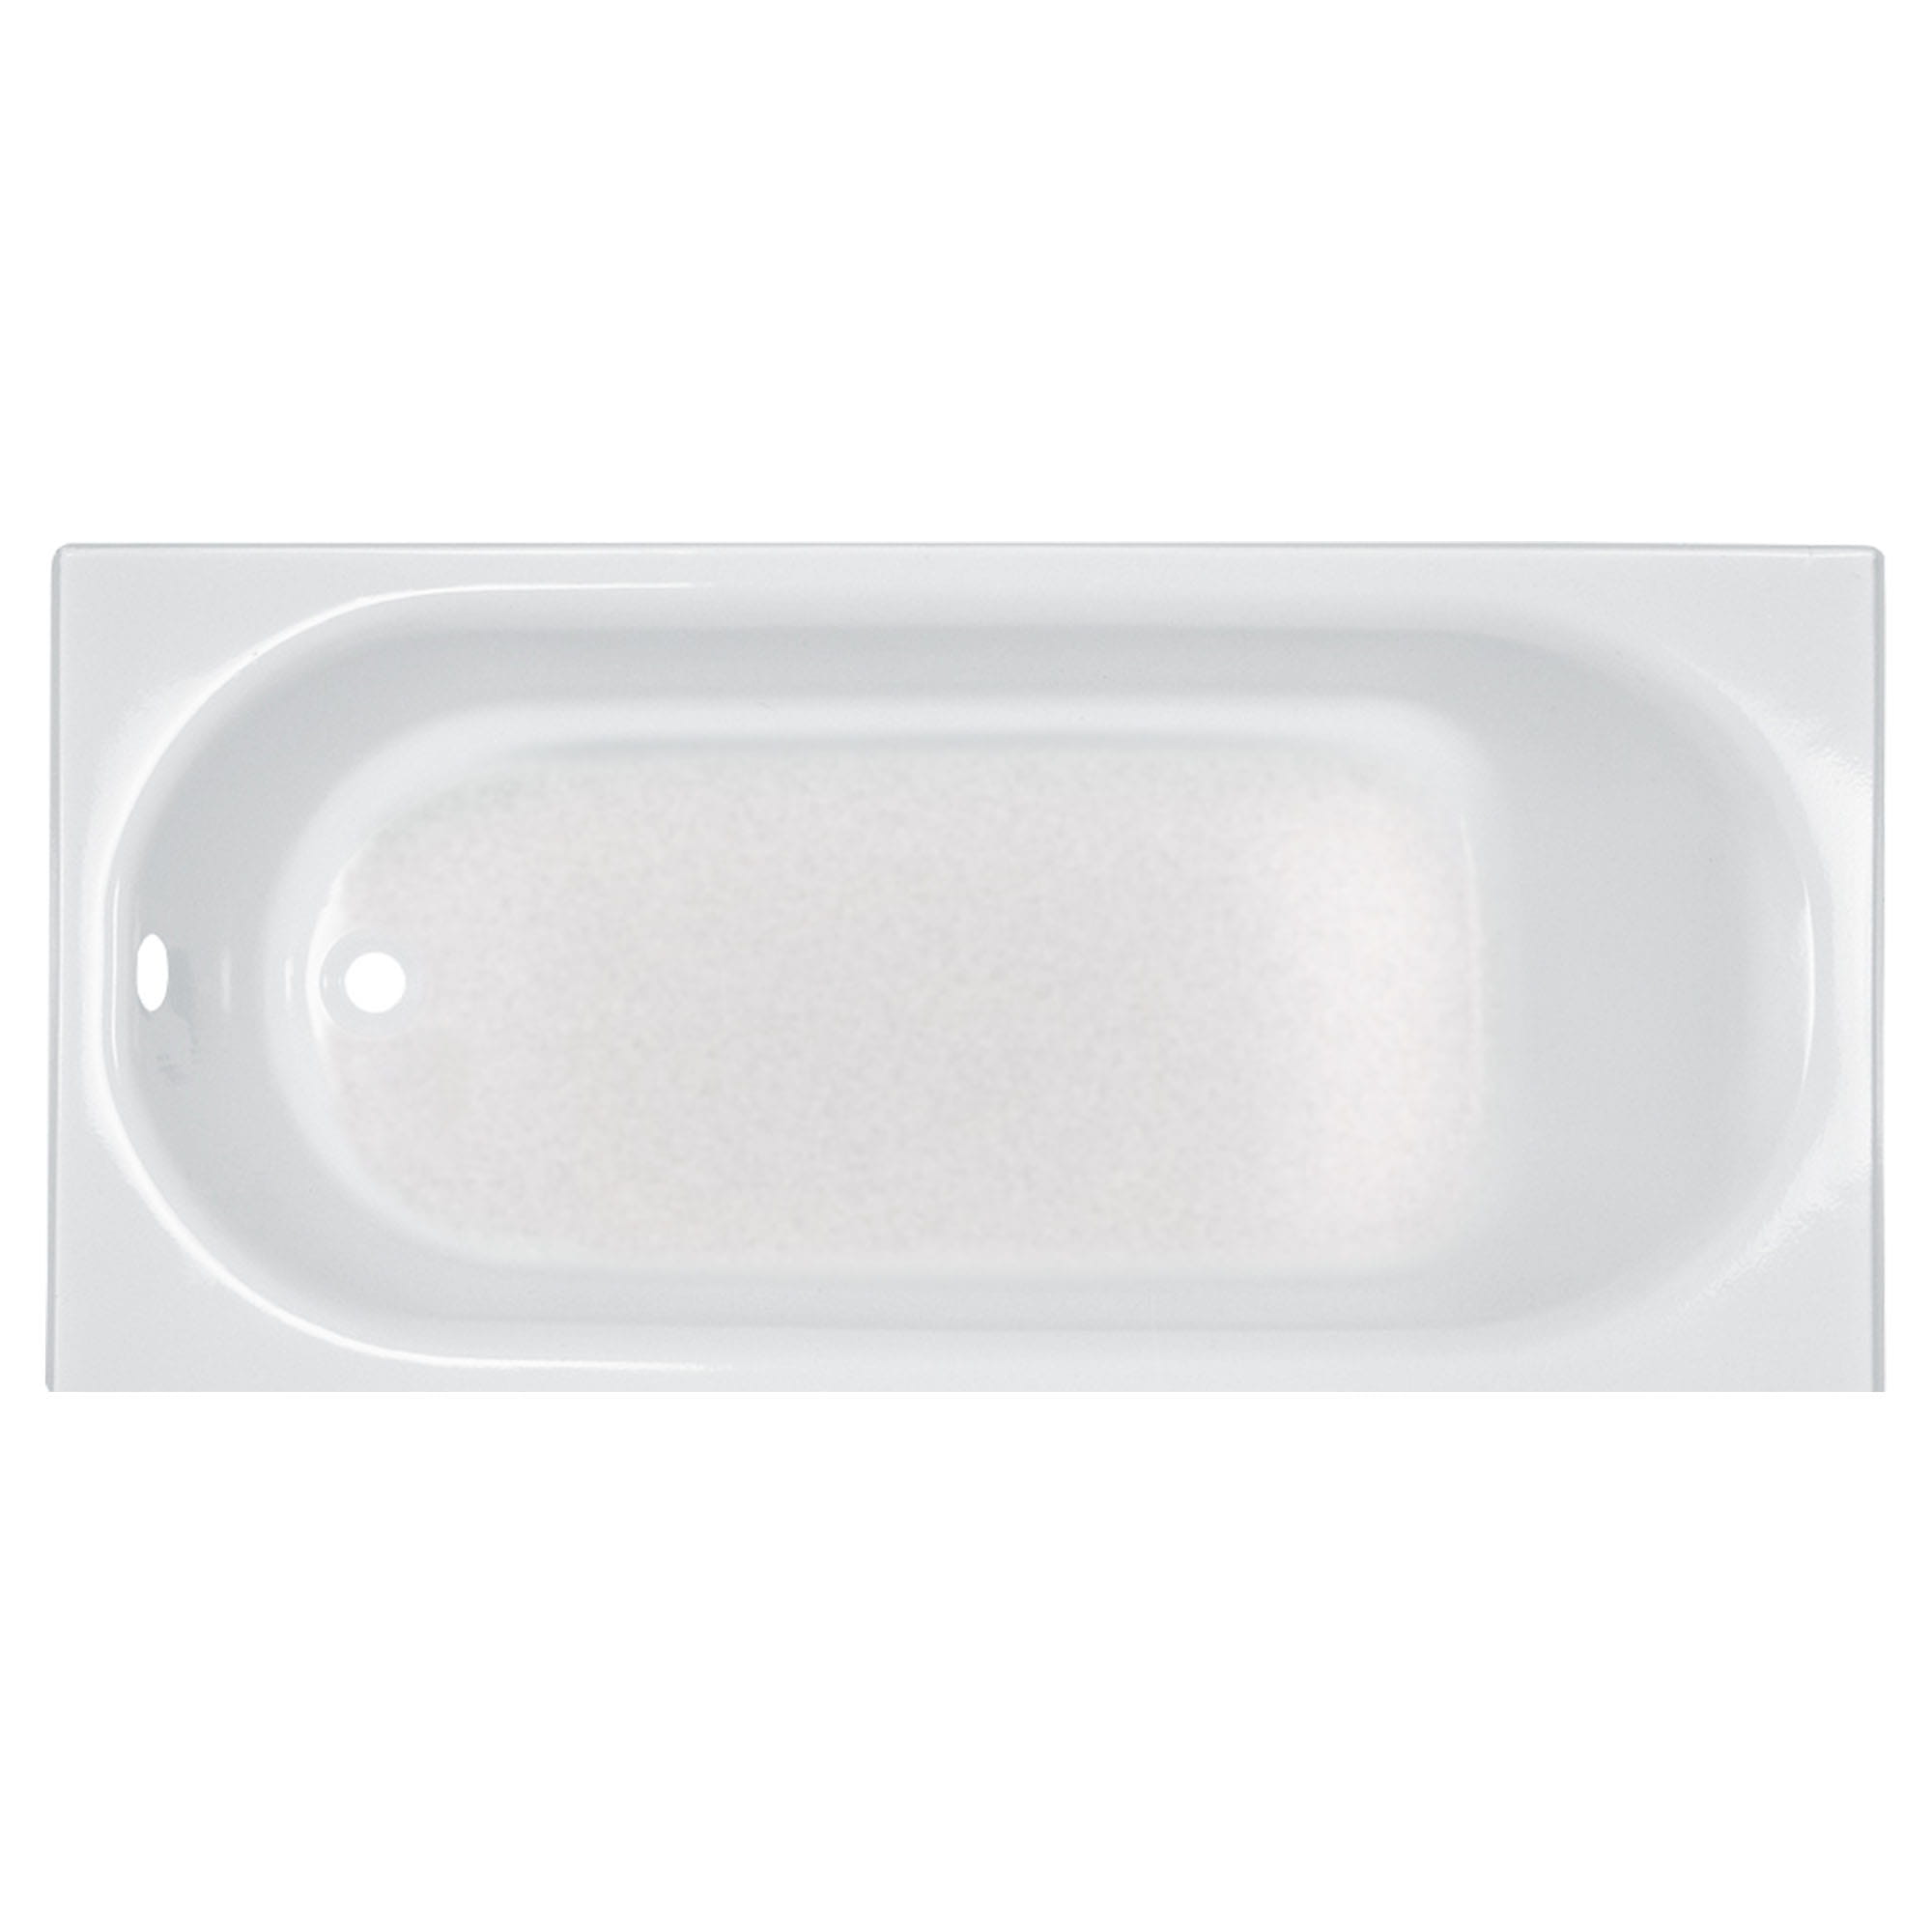 Princeton Americast 60 x 30 Inch Integral Apron Bathtub Above Floor Rough with Left Hand Outlet WHITE